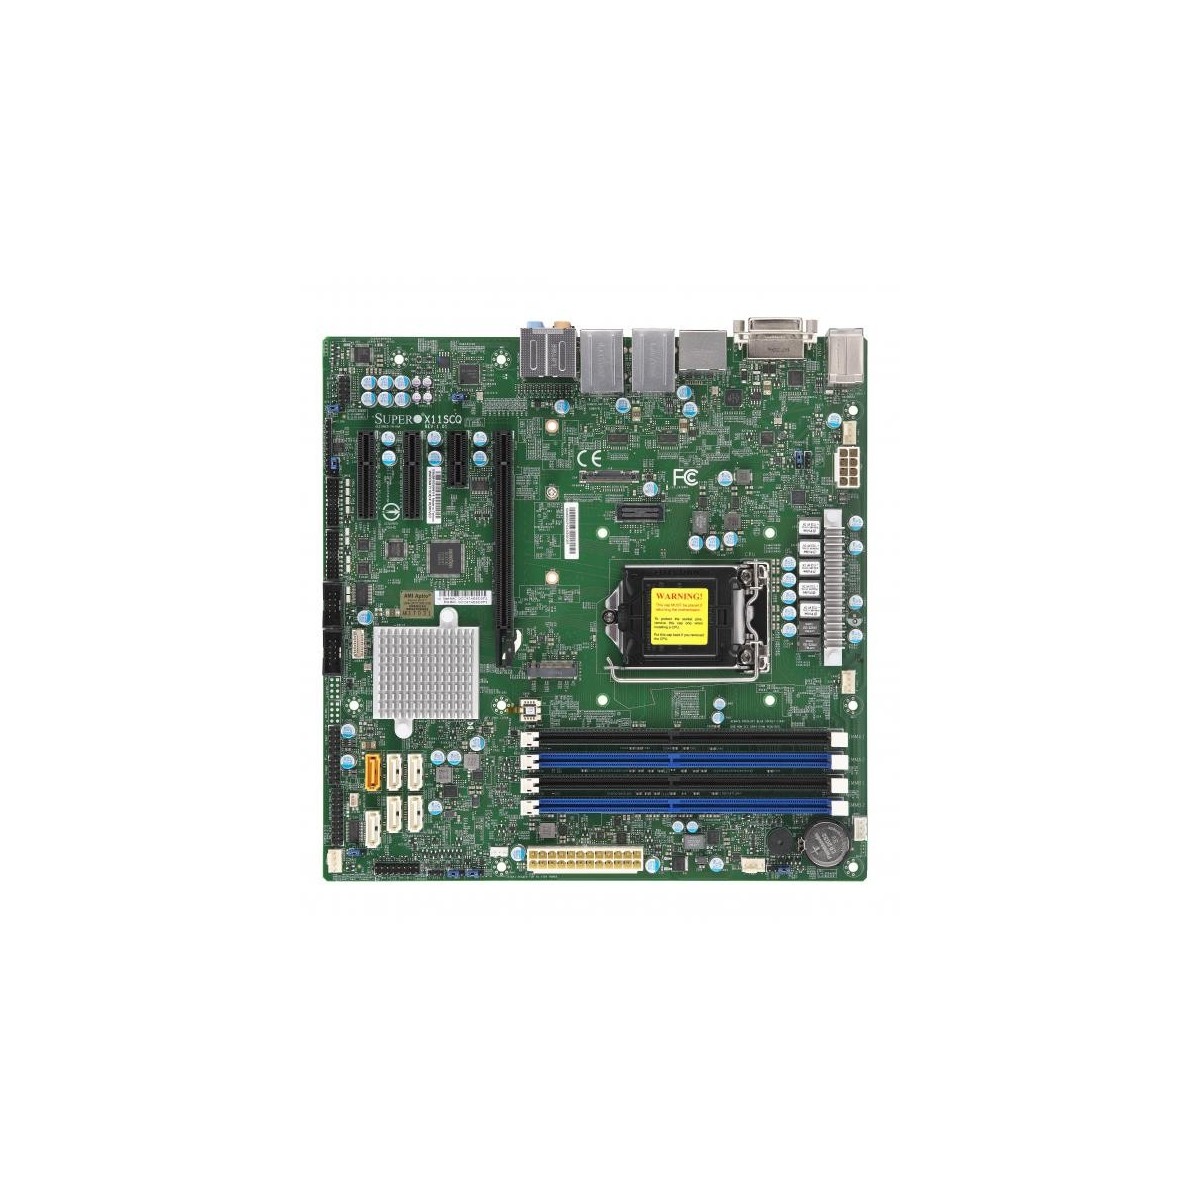 Supermicro MBD-X11SCQ Motherboard